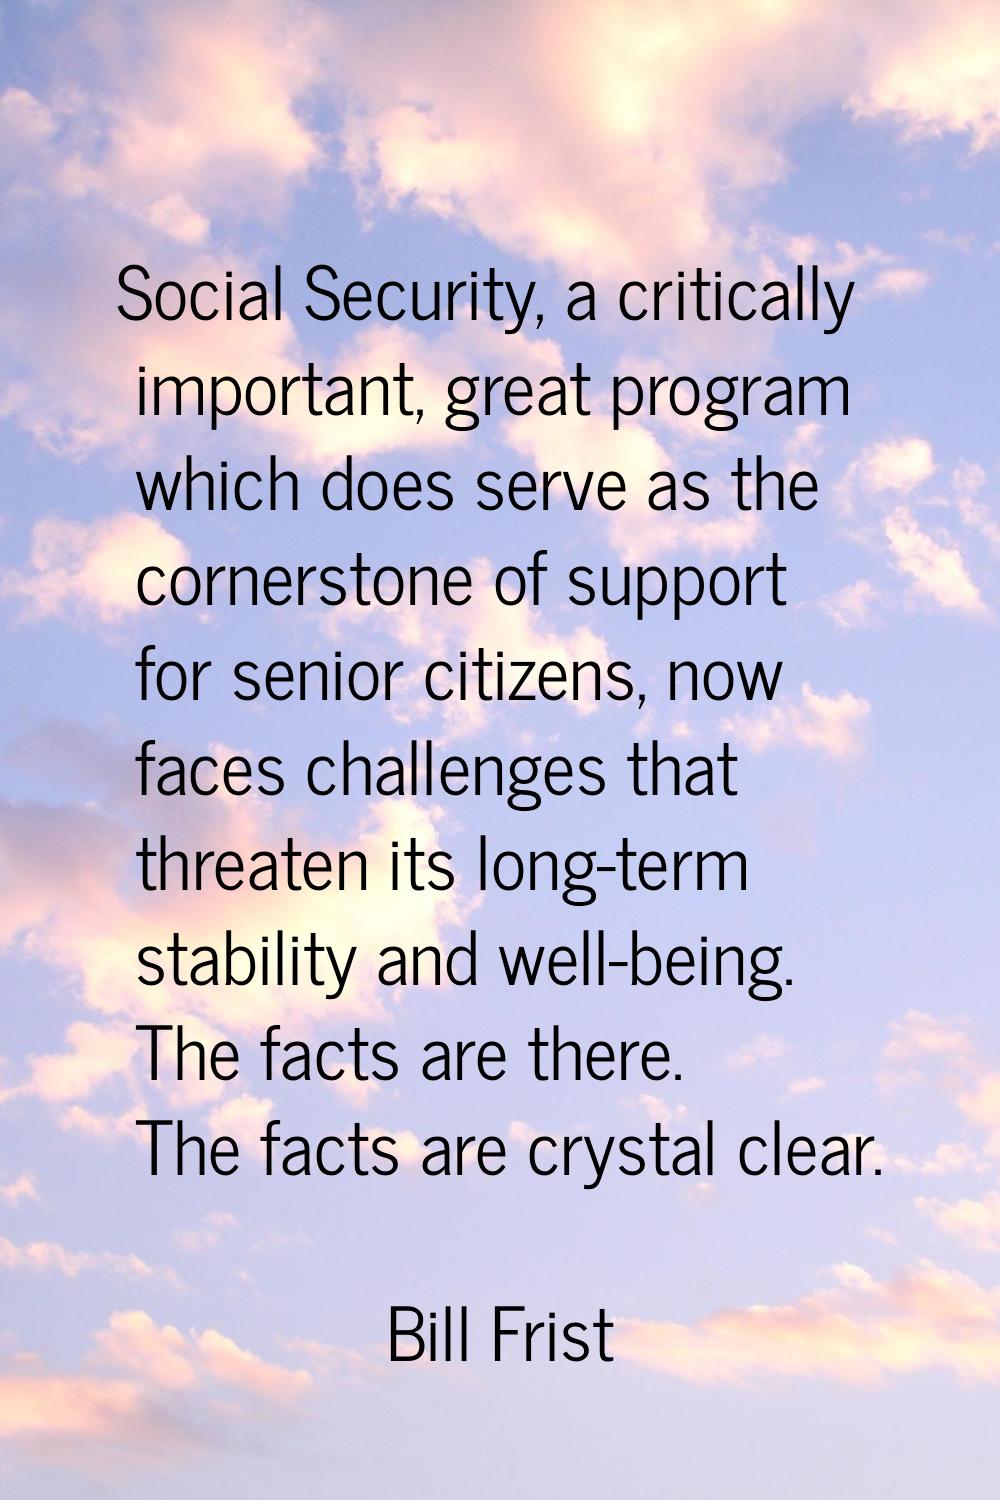 Social Security, a critically important, great program which does serve as the cornerstone of suppo